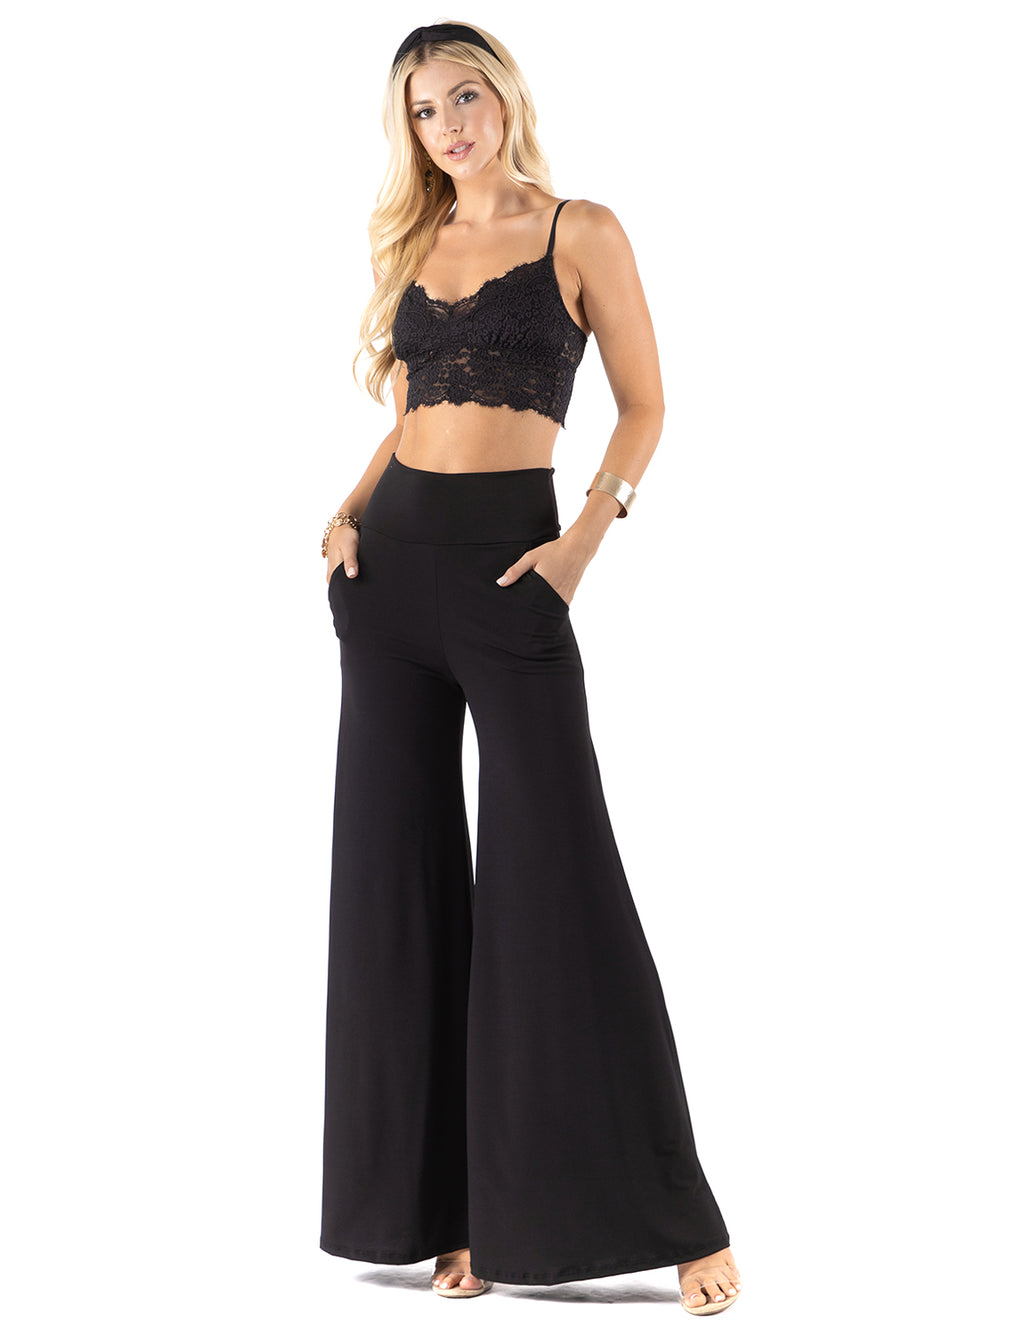 Beautiful woman wearing this amazing Black High waist palazzo pants featuring pockets, wide legs, and a comfortable stretchy fabric